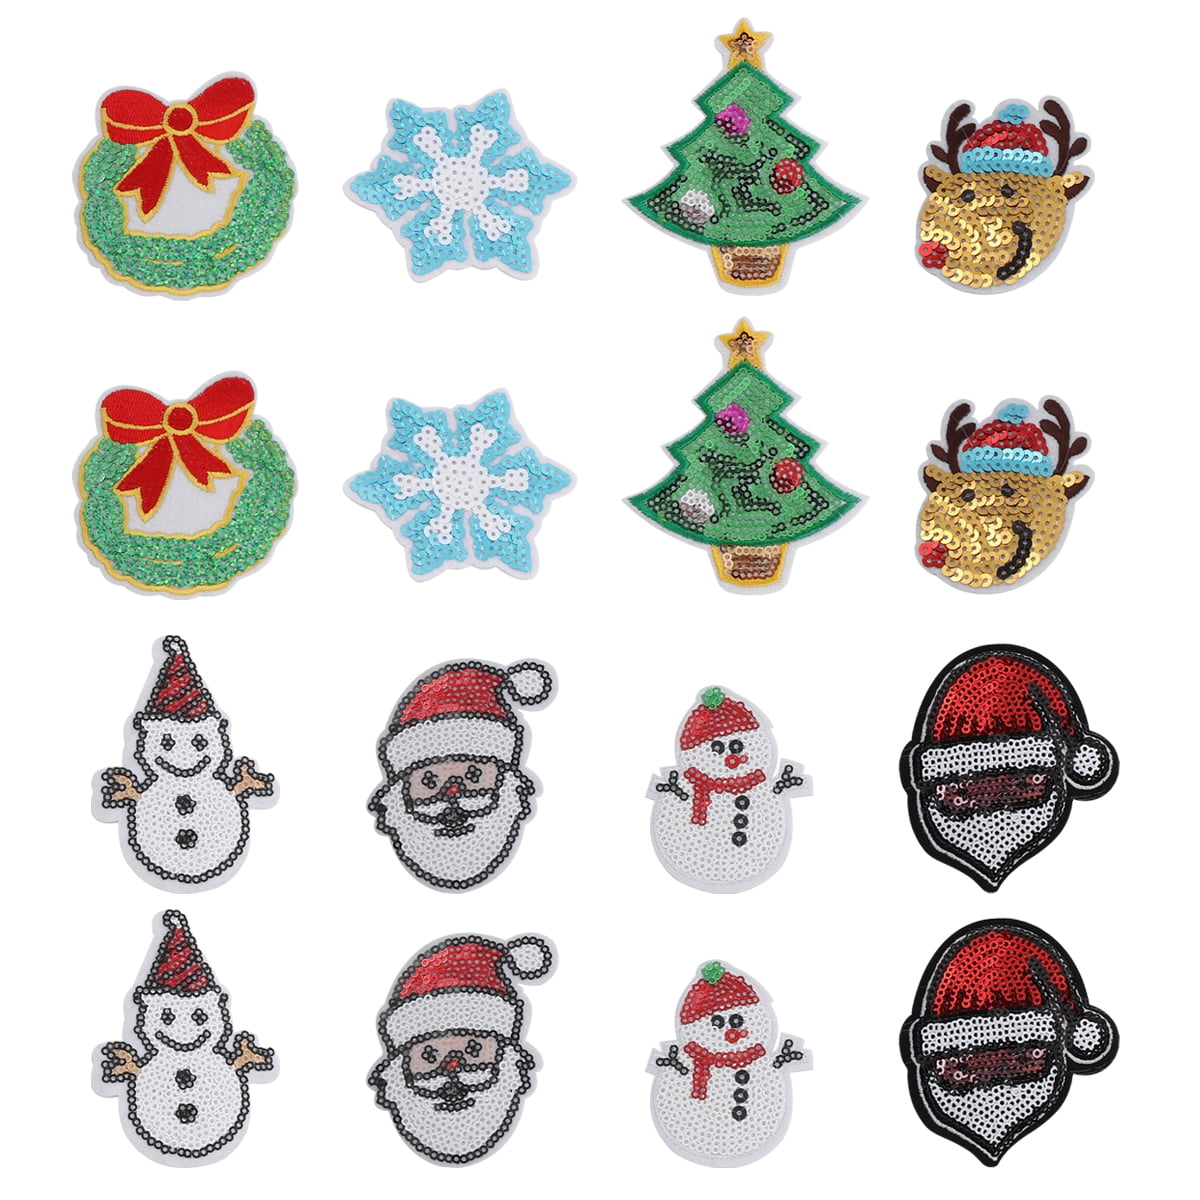  NOLITOY 20 Pcs Embroidery Patches Christmas Sew Applique  Christmas Iron on Patches Patch Glue for Iron on Patches Trendy Decor  Christmas Decor Embroidered Patches Fashion Clothing Fabric